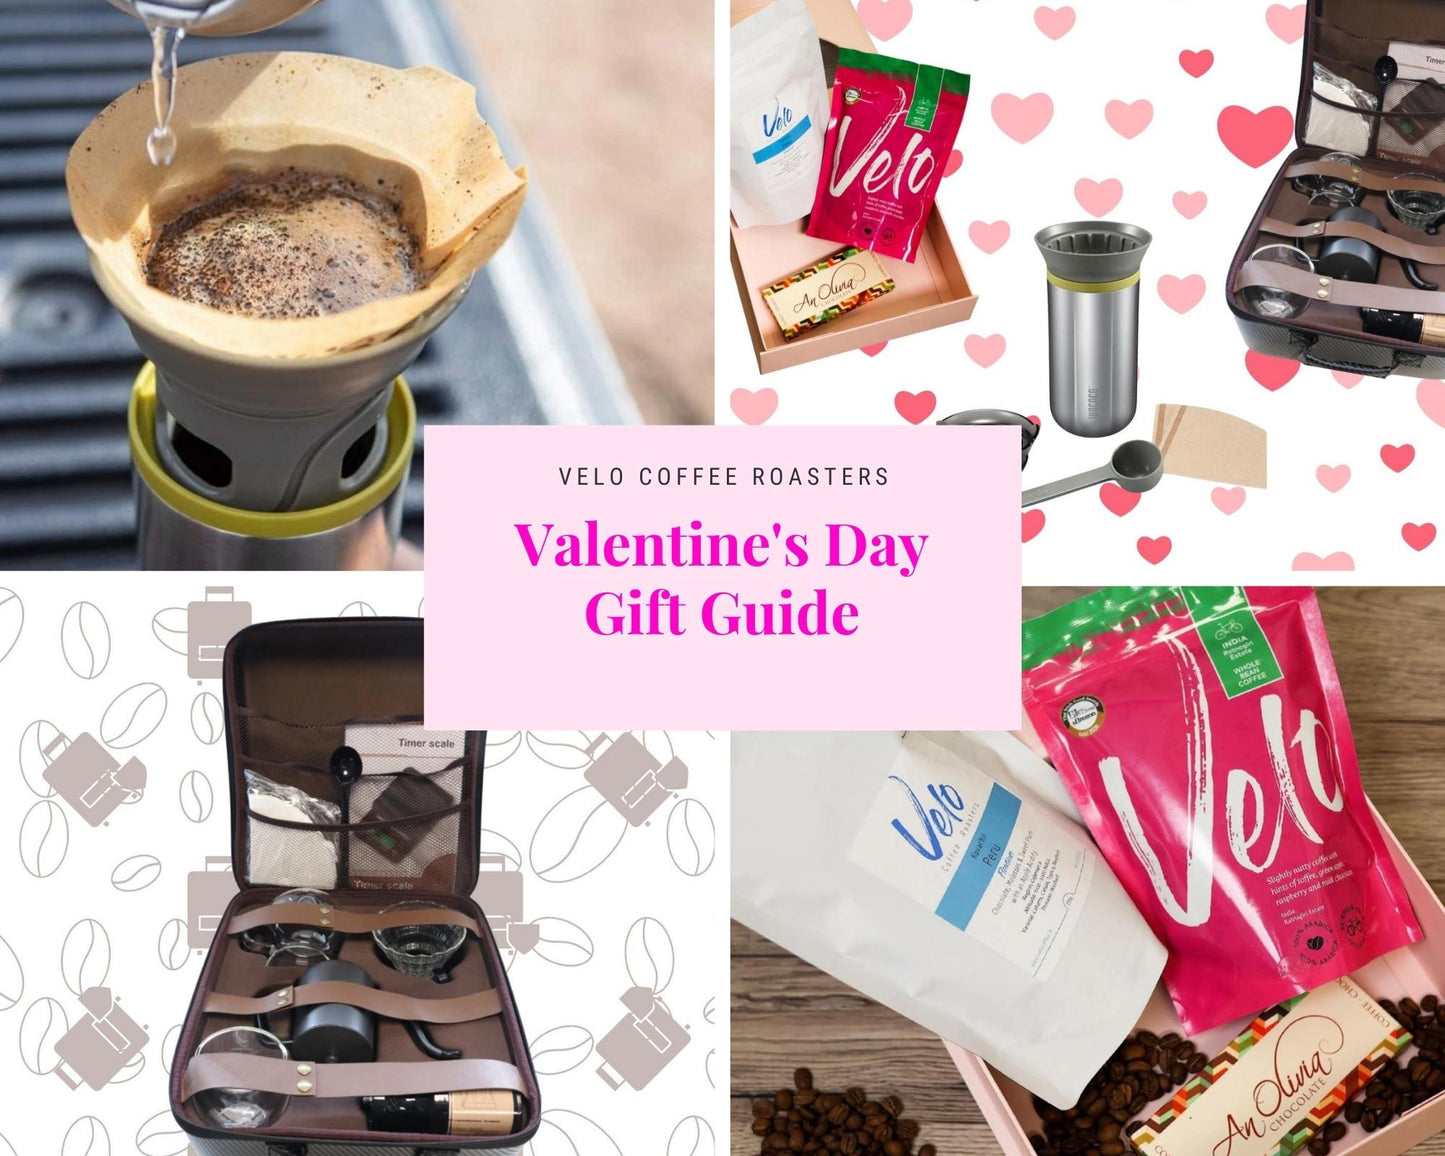 Valentine’s Day Gift Guide - Velo Coffee Roasters